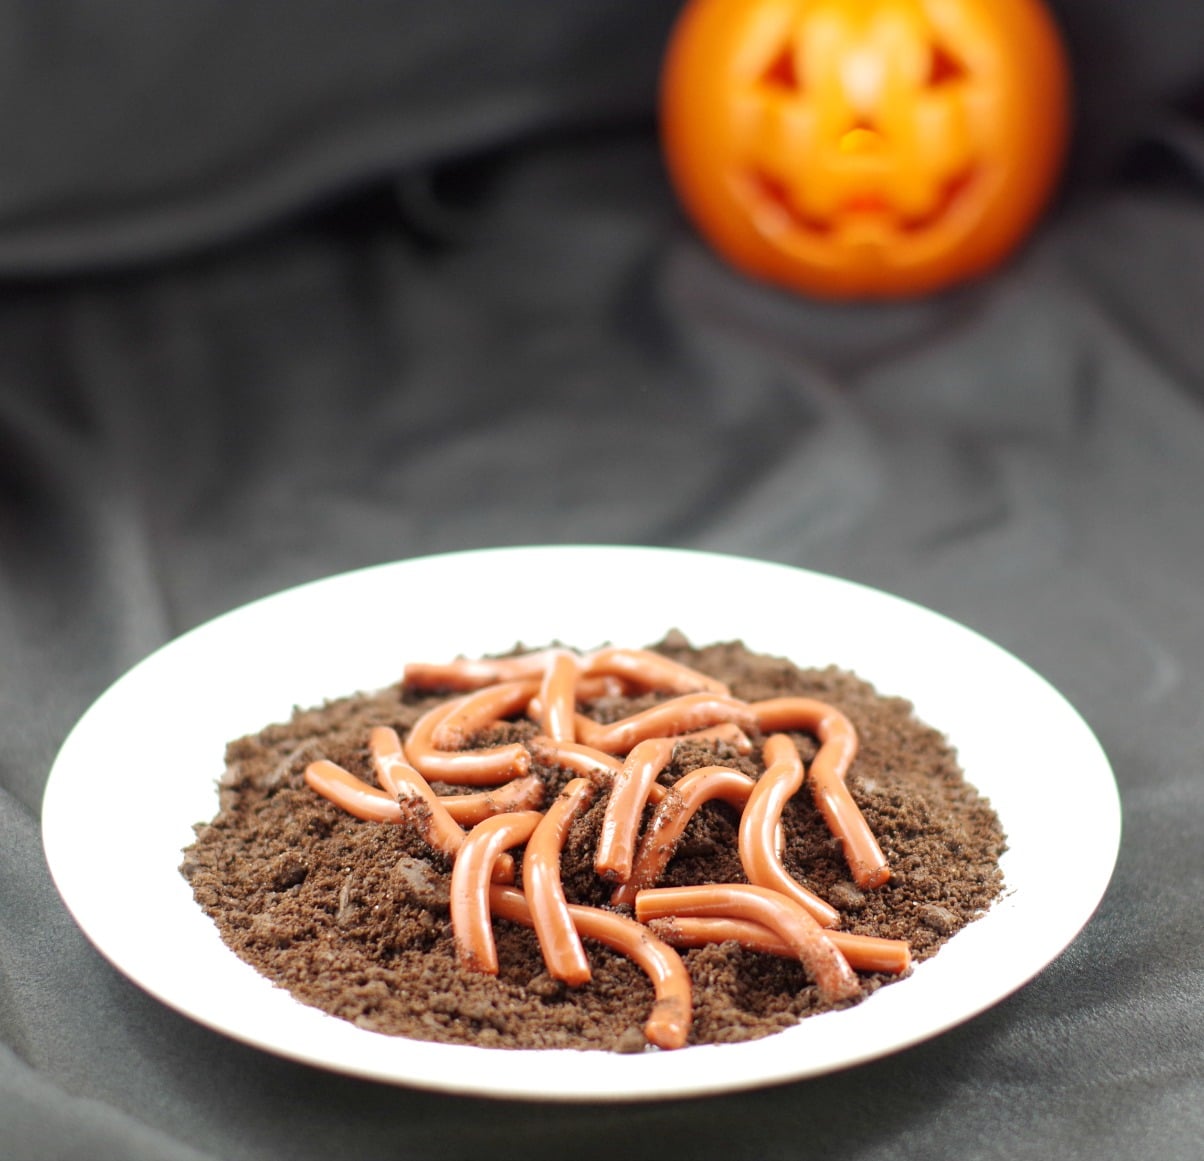 Jello worms - foodmeanderings.com